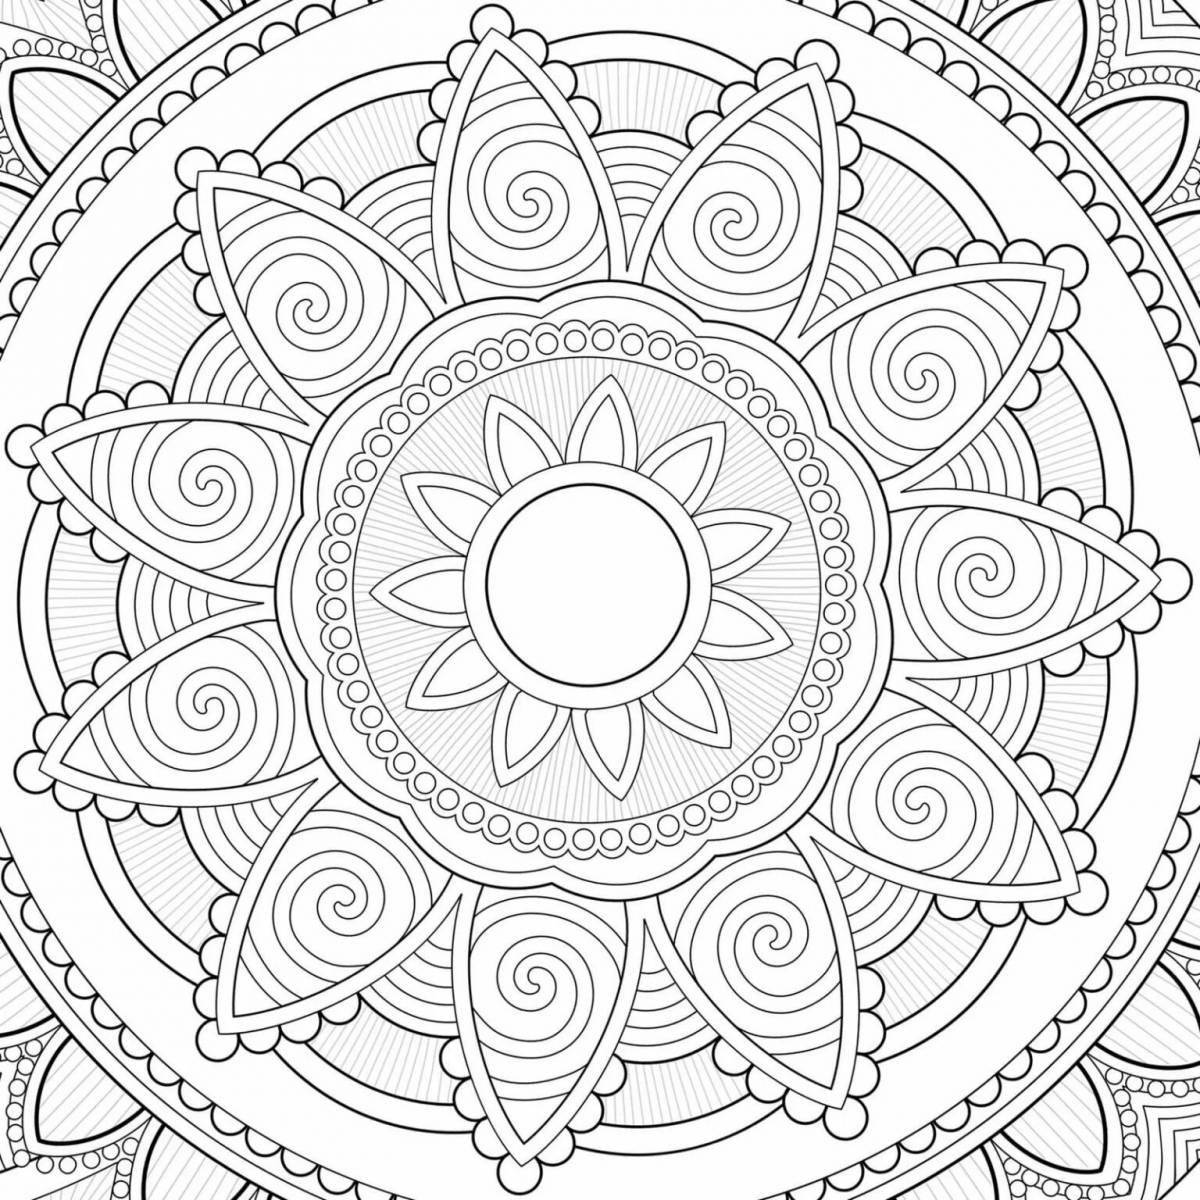 Reassuring coloring book for peace of mind